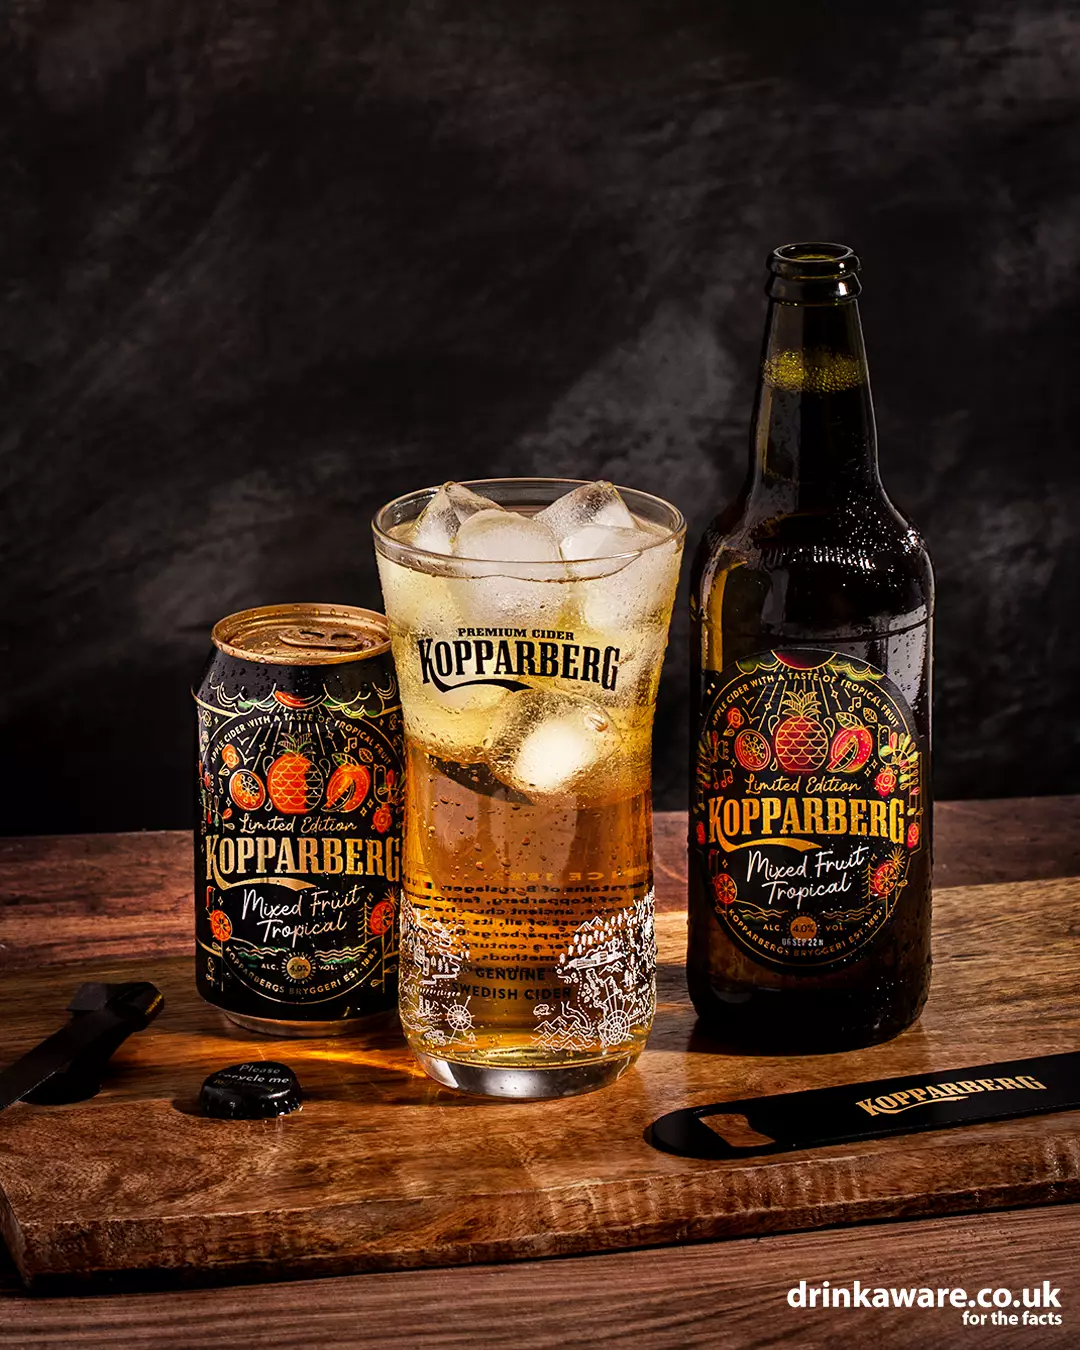 Say hello to the Kopparberg Mixed Fruit Tropical Cider (